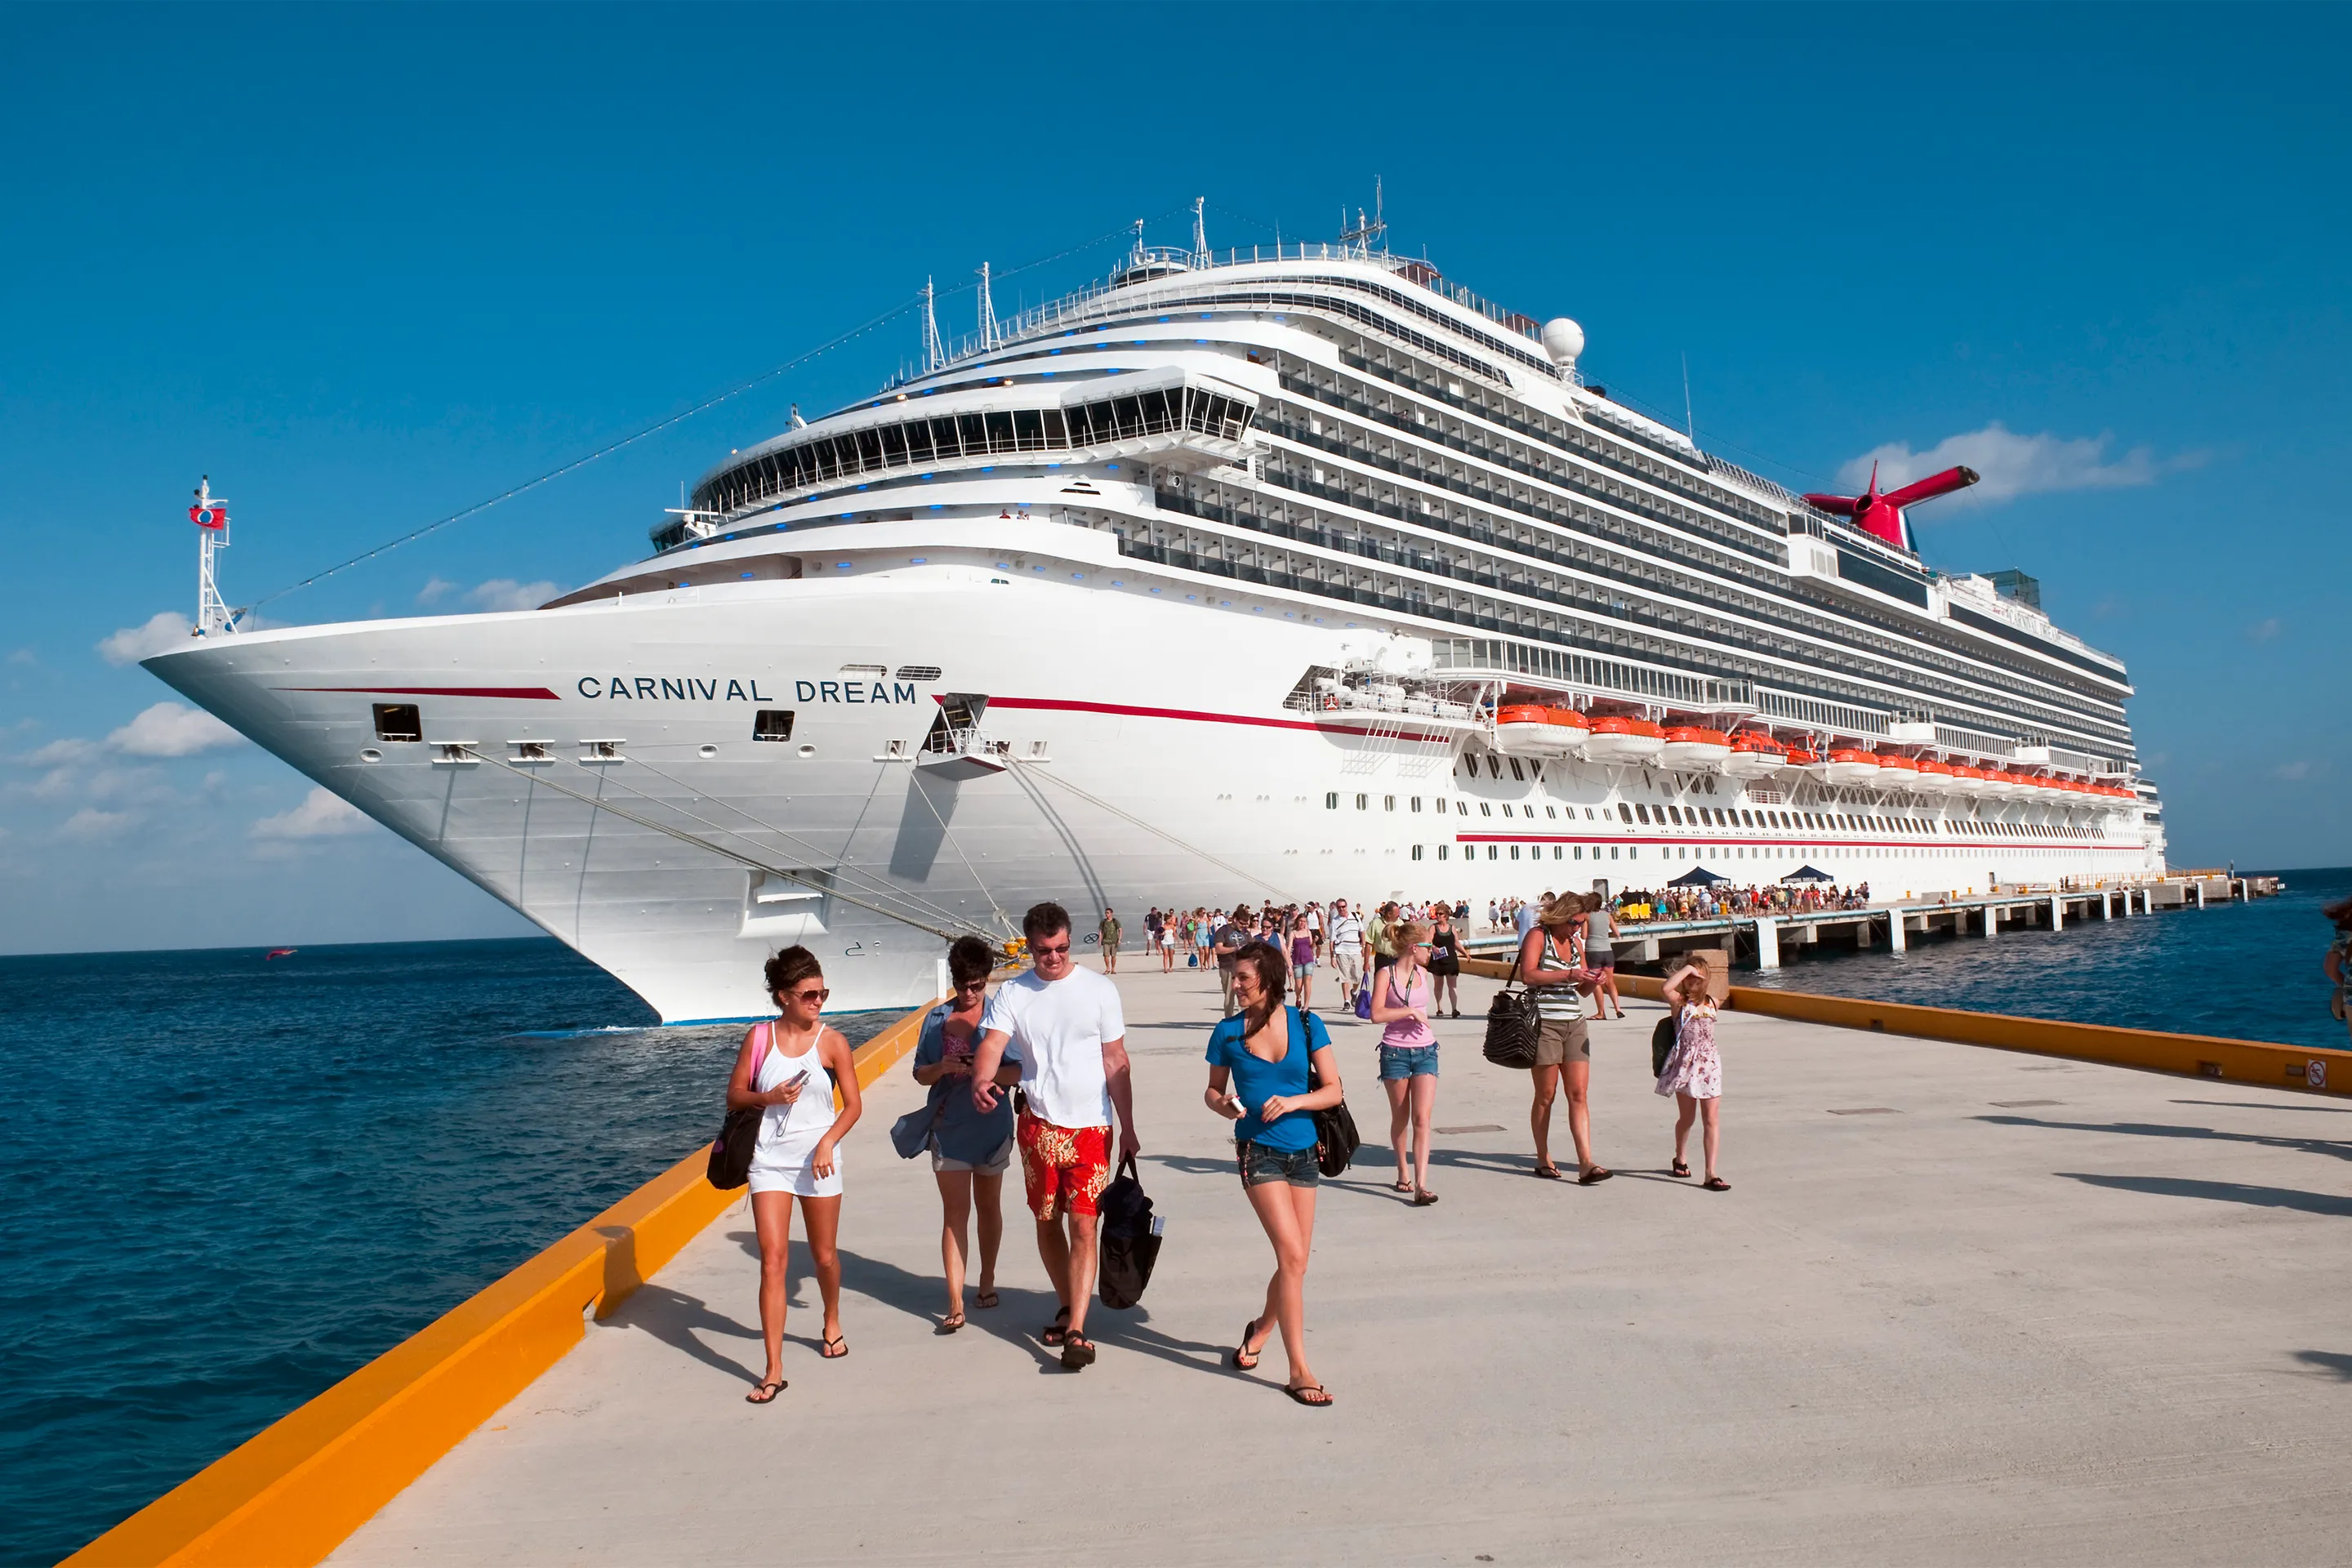 Carnival Cruise Line Duty Free Liquor Shop - Stock up Onboard!